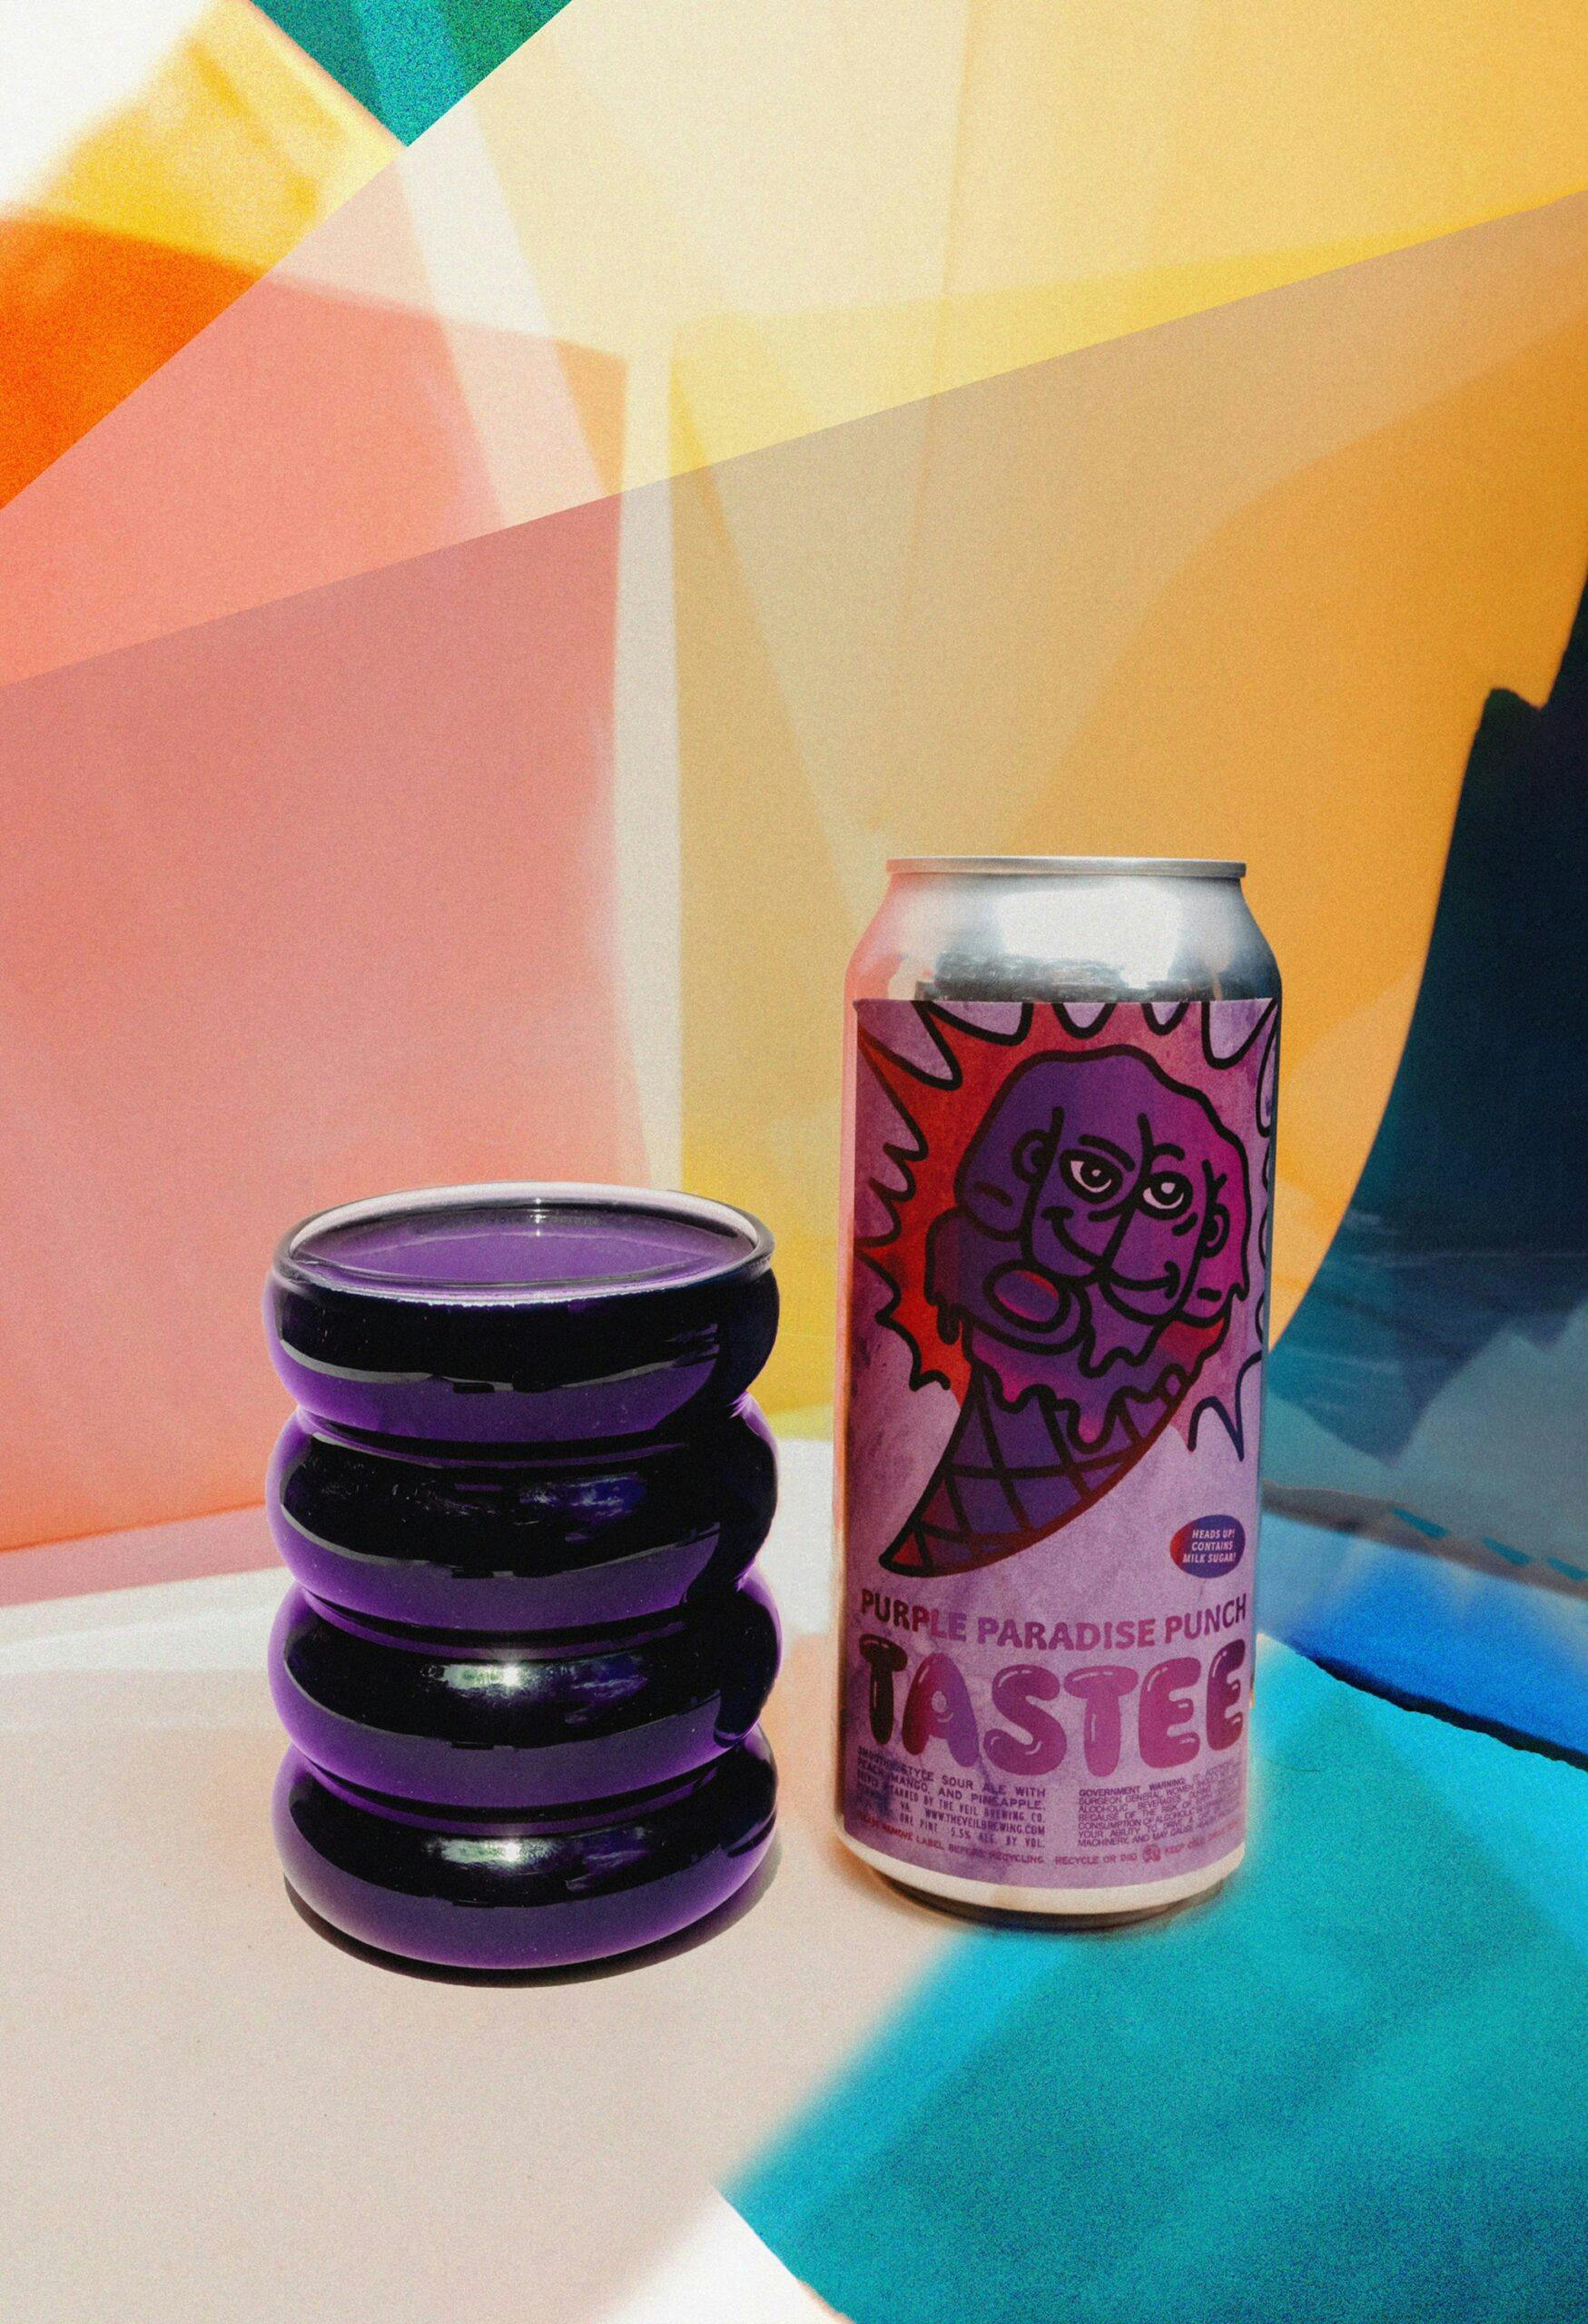 Purple Paradise Punch Tastee 4-Pack 16oz cans | The Veil Brewing Online ...